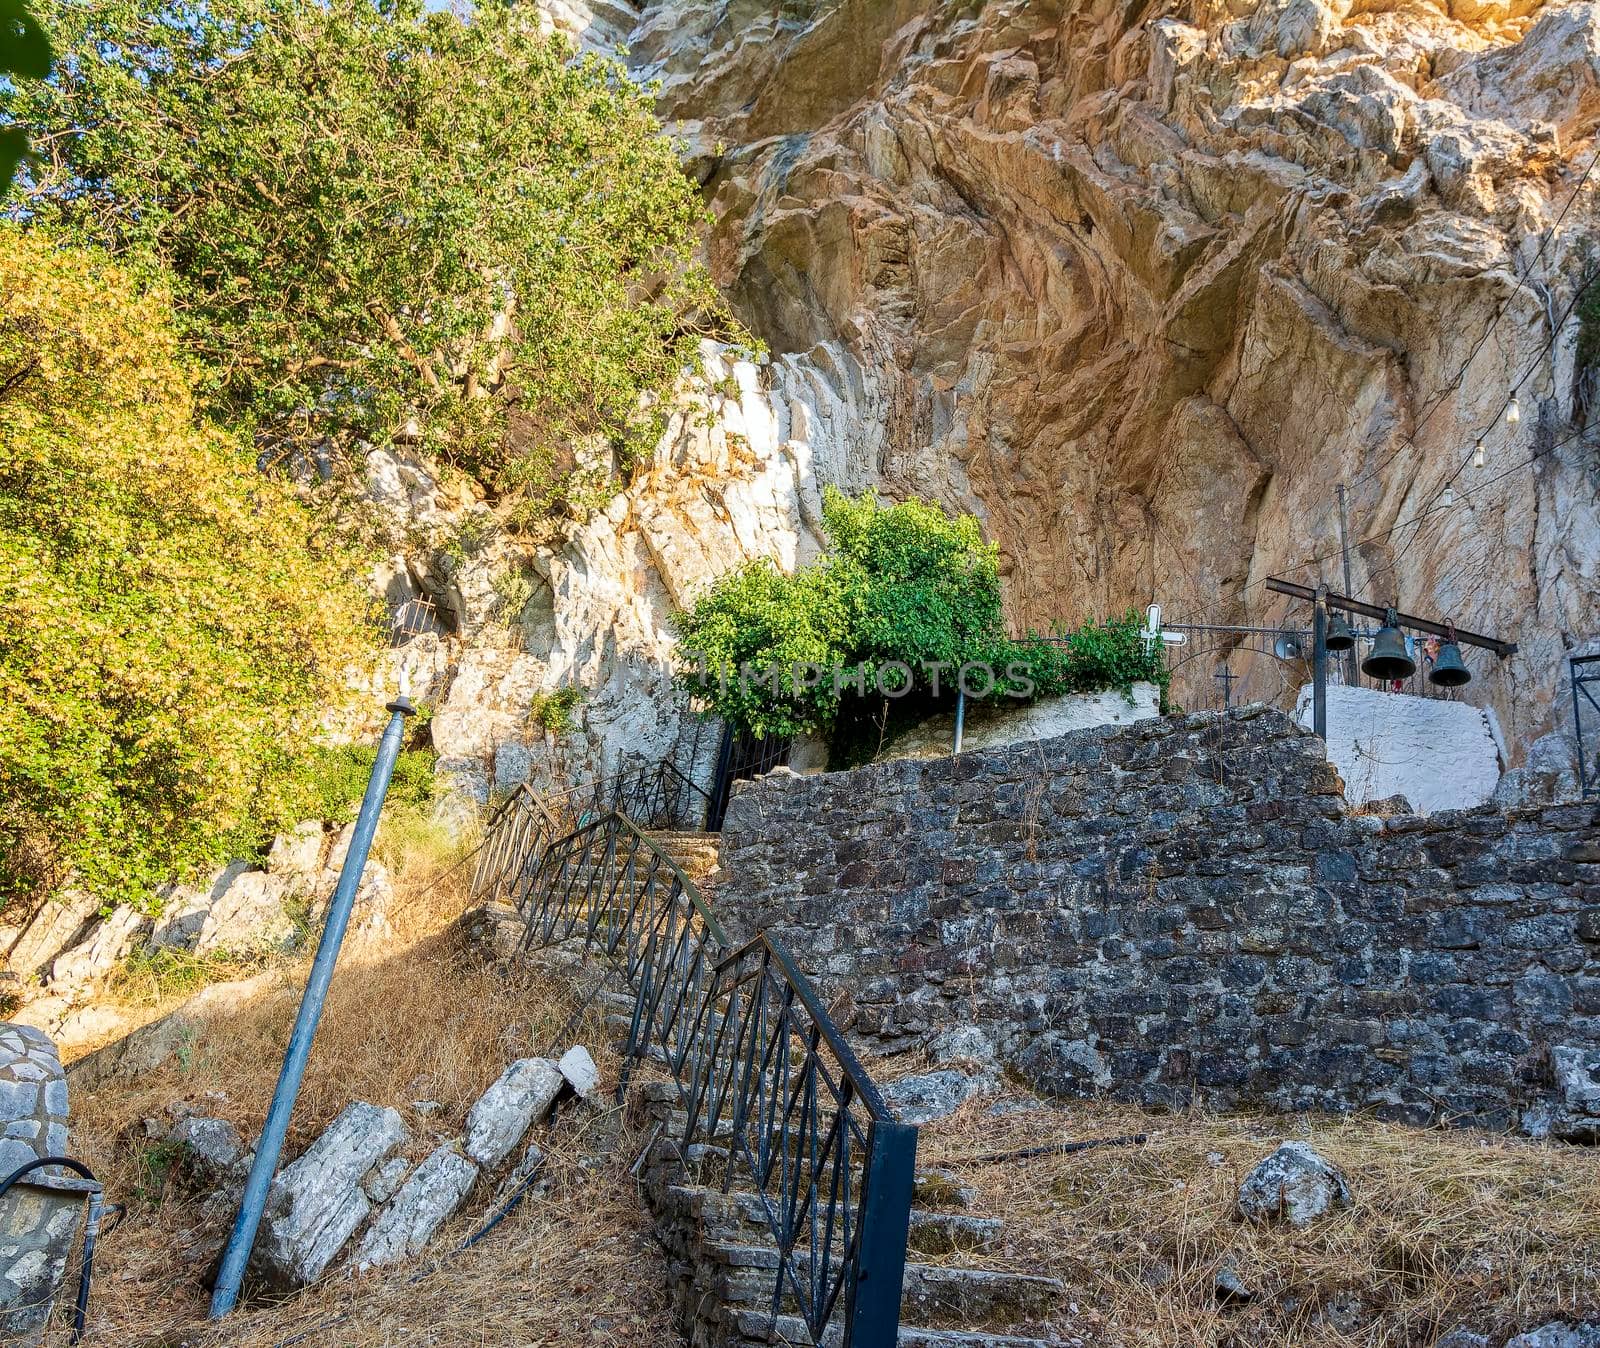 Cave Curch of Koufieros. One of the most historic caves of Messinia is located in the area of Chora, on the slopes of Mount Koufiros by ankarb